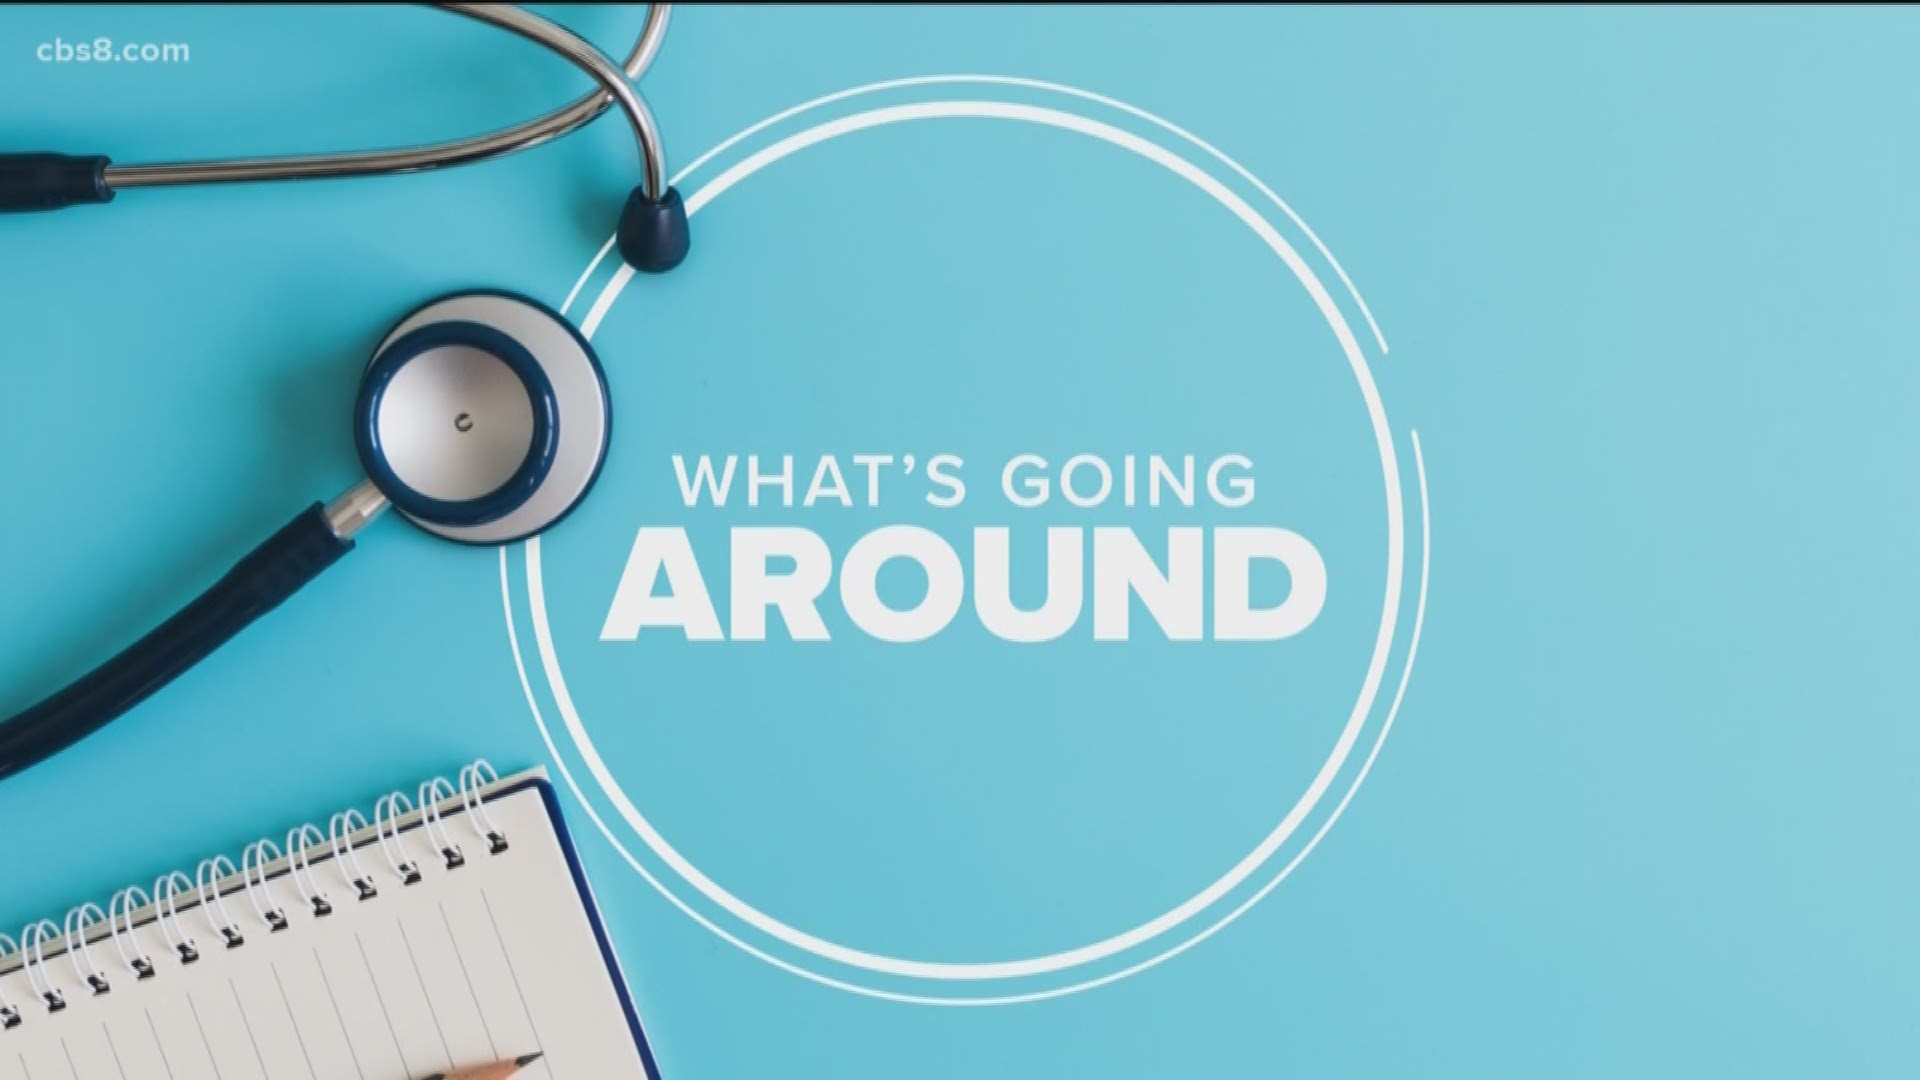 In this week's What's Going Around Report, an update on a serious outbreak and a timely reminder as the summer travel season nears. The nurse practitioners at CVS Minute Clinic have a variety of issues covered for you.